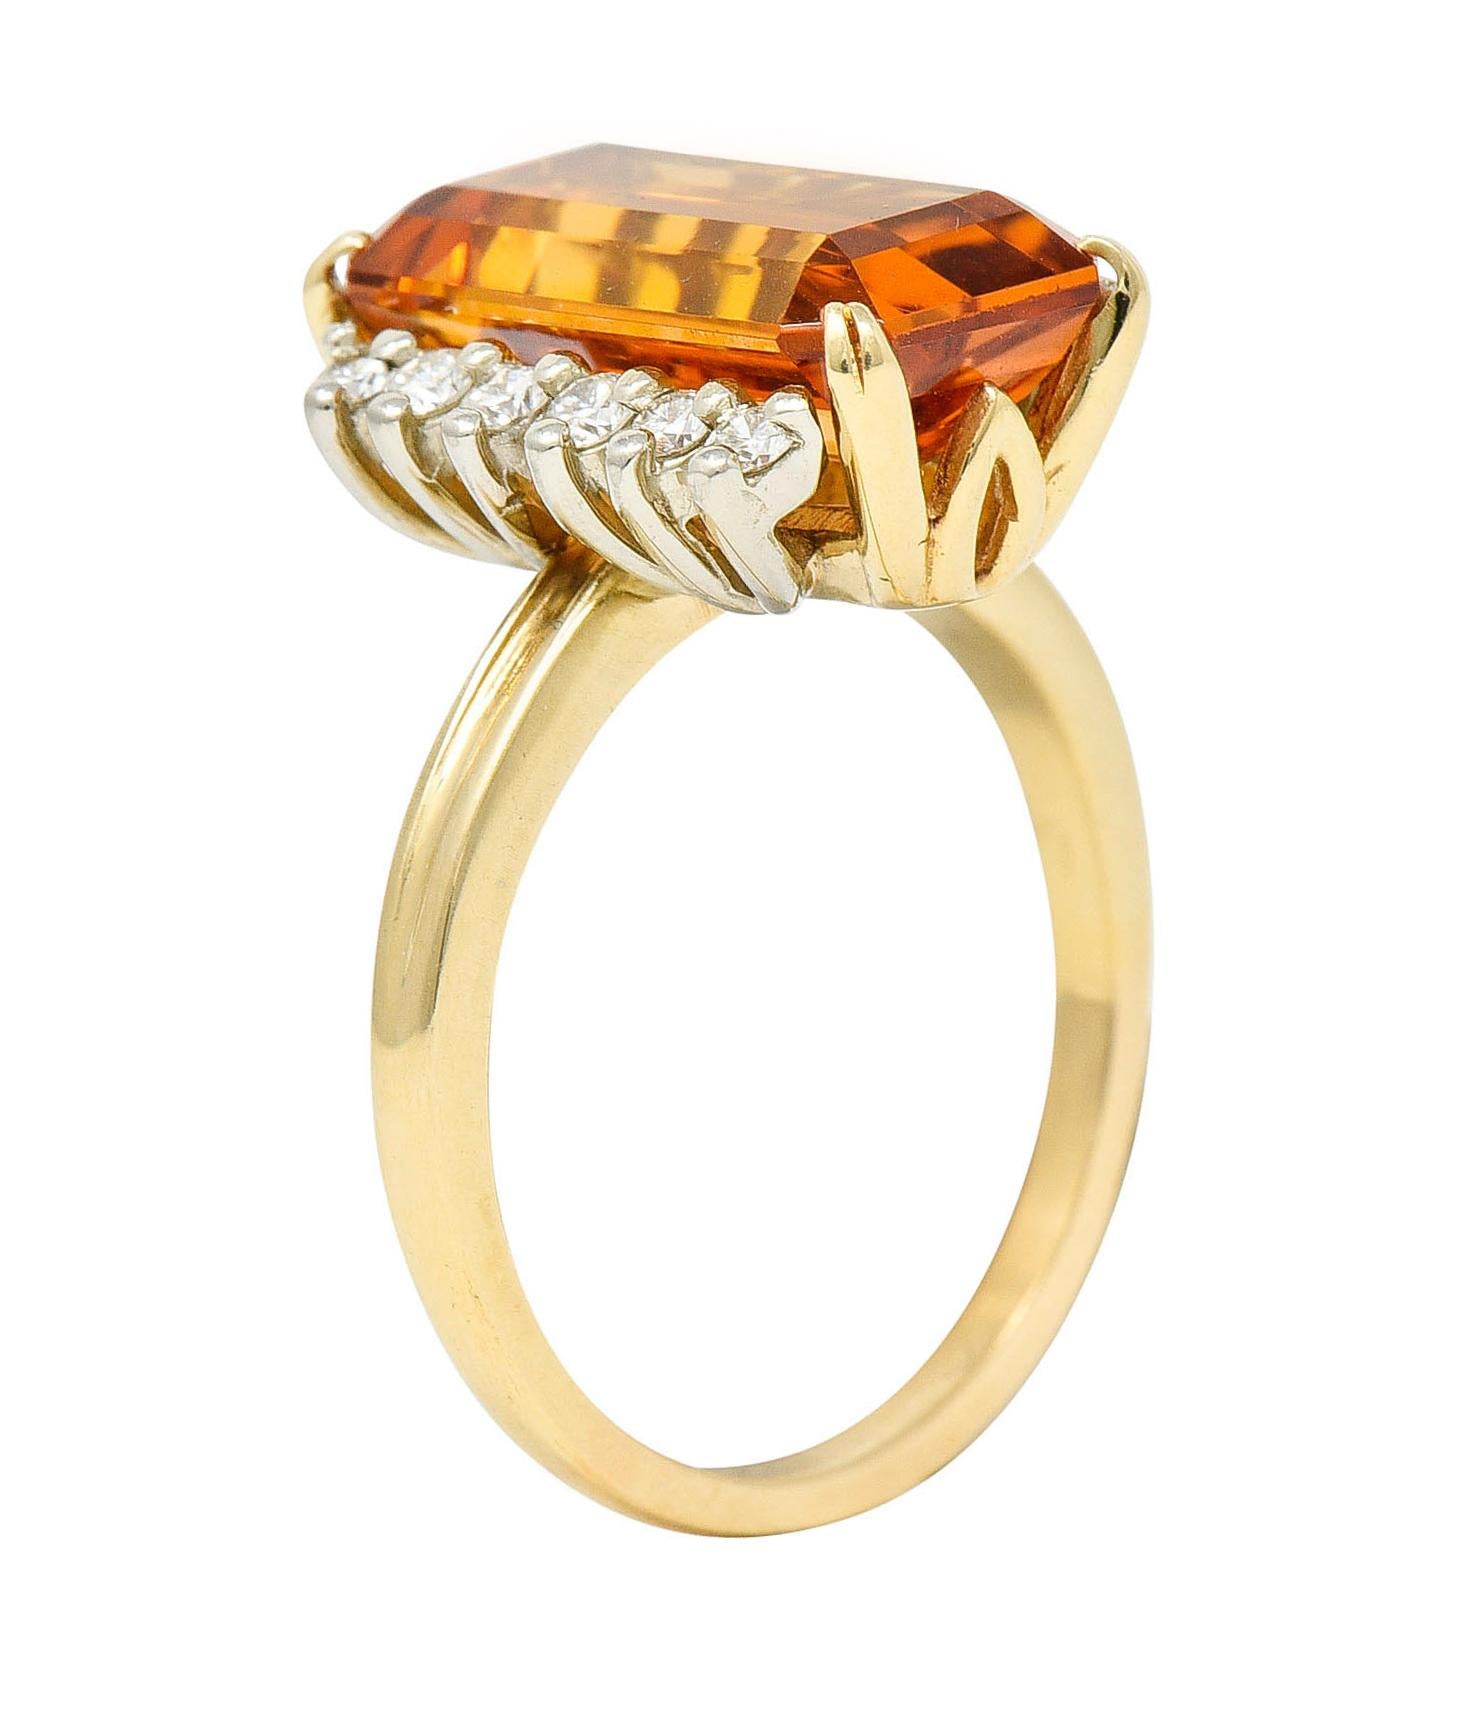 Featuring an emerald cut imperial topaz weighing approximately 6.15 carats

Set by split prongs and exhibits slightly peachy saturated orange color

Flanked by two rows of round brilliant cut diamonds - set in platinum

Weighing in total